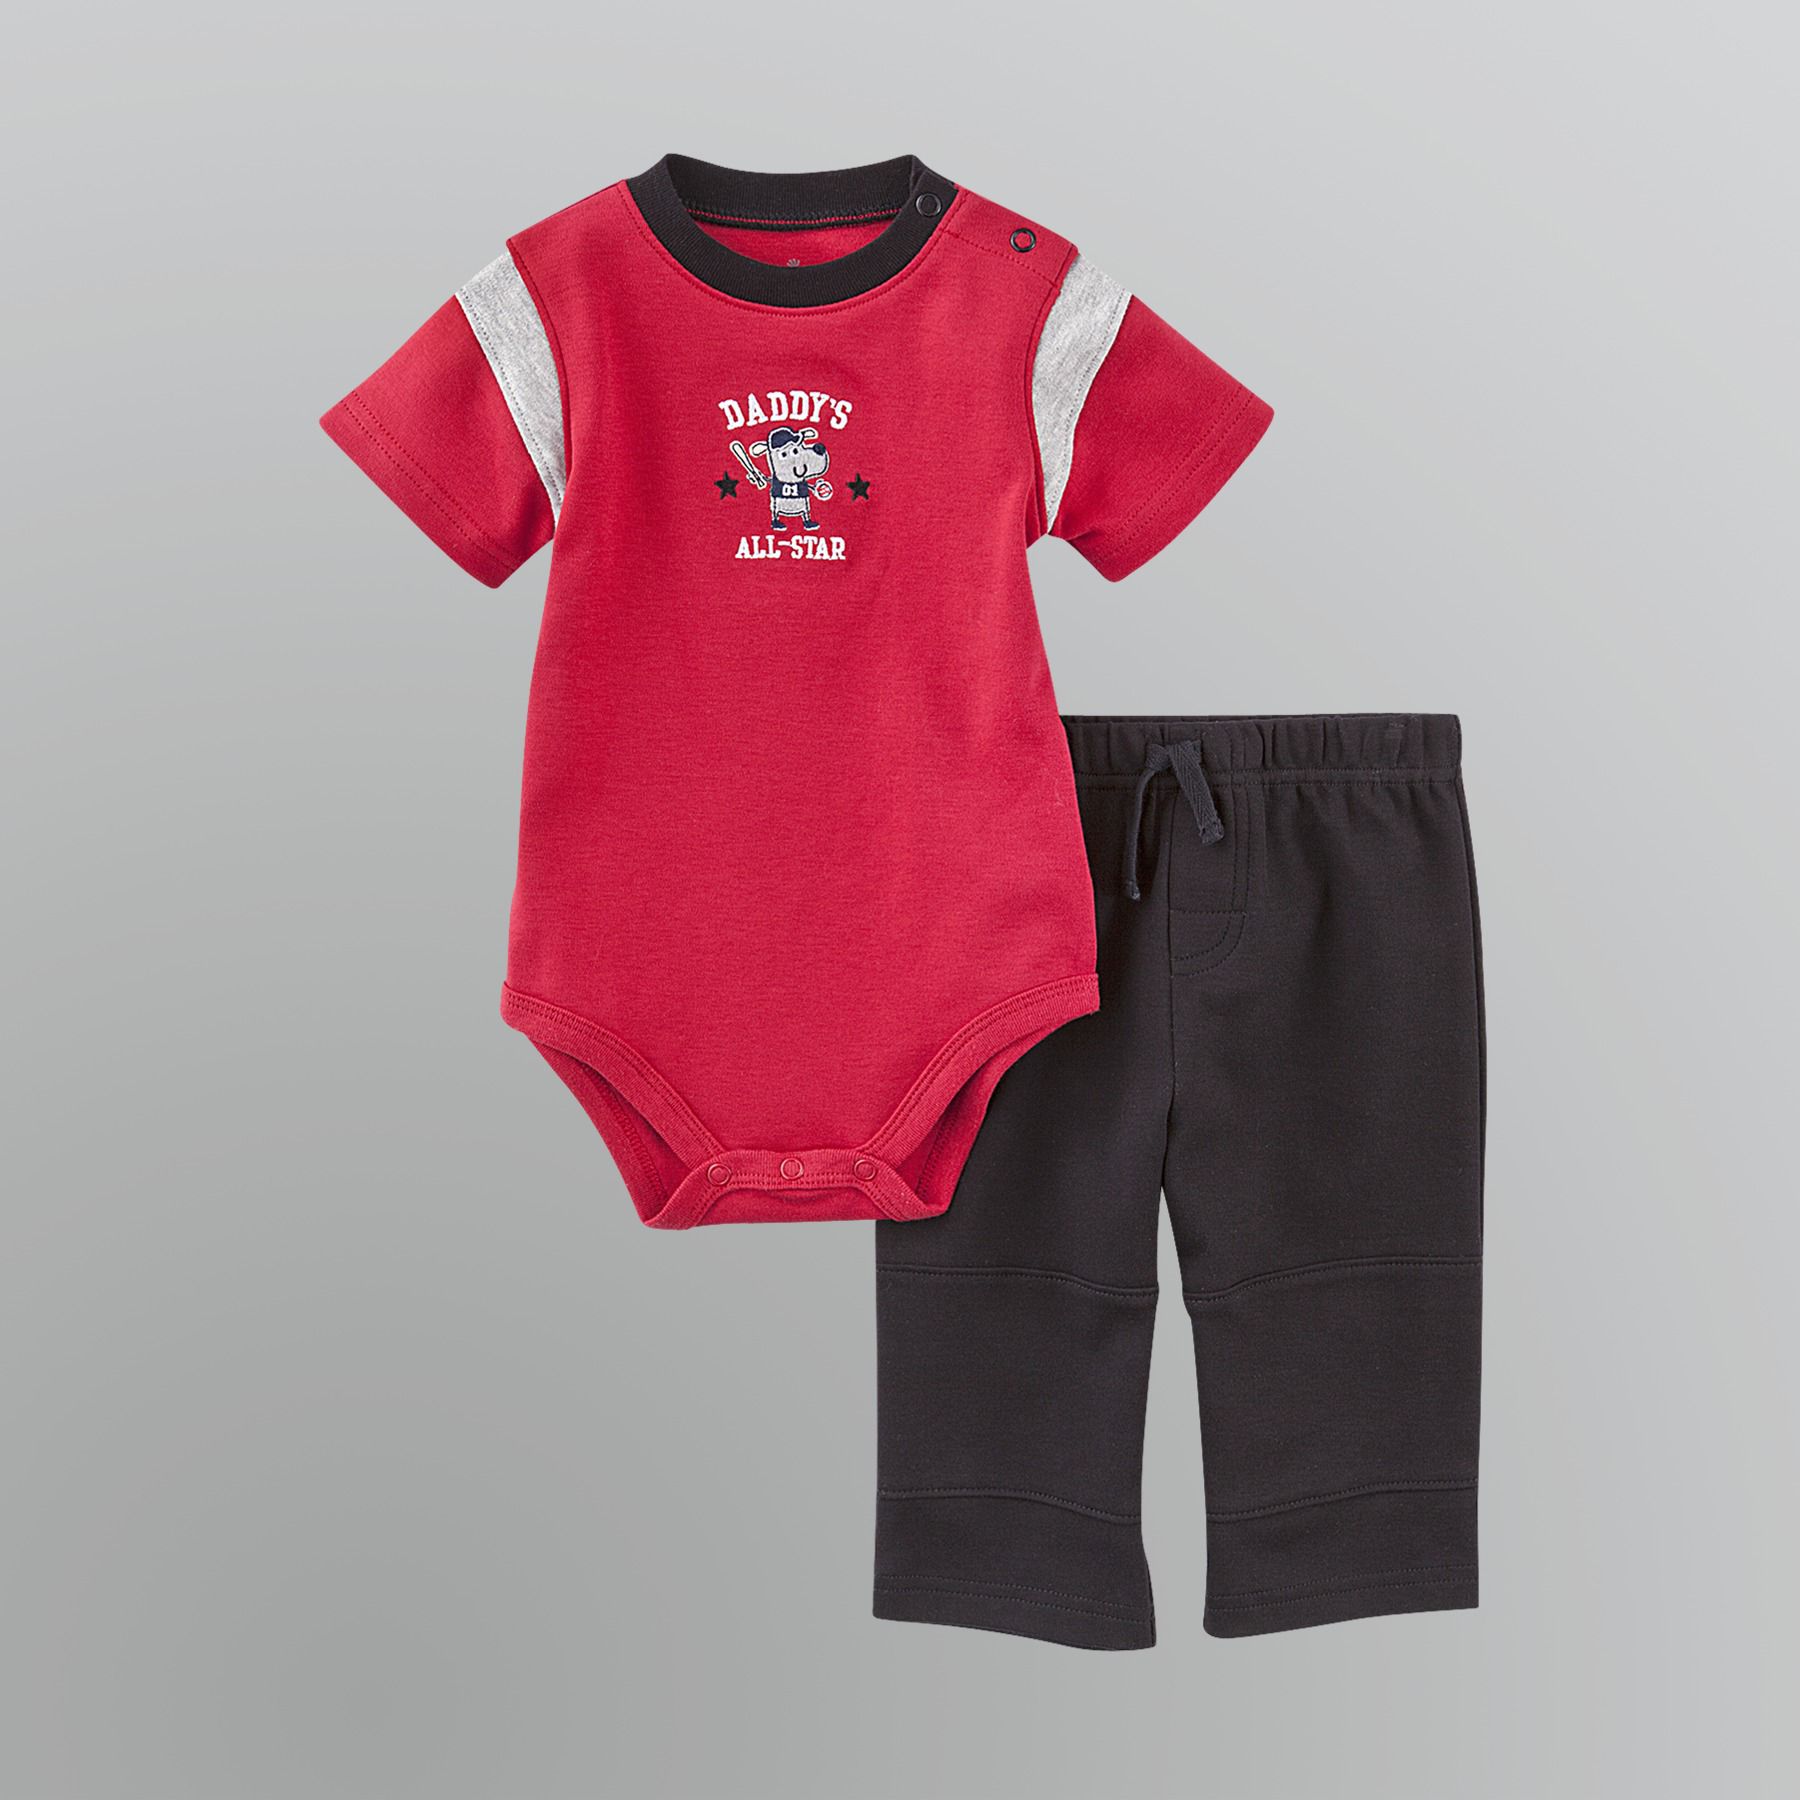 Small Wonders Infant Boy's Daddy's All-Star Knit Pant Set